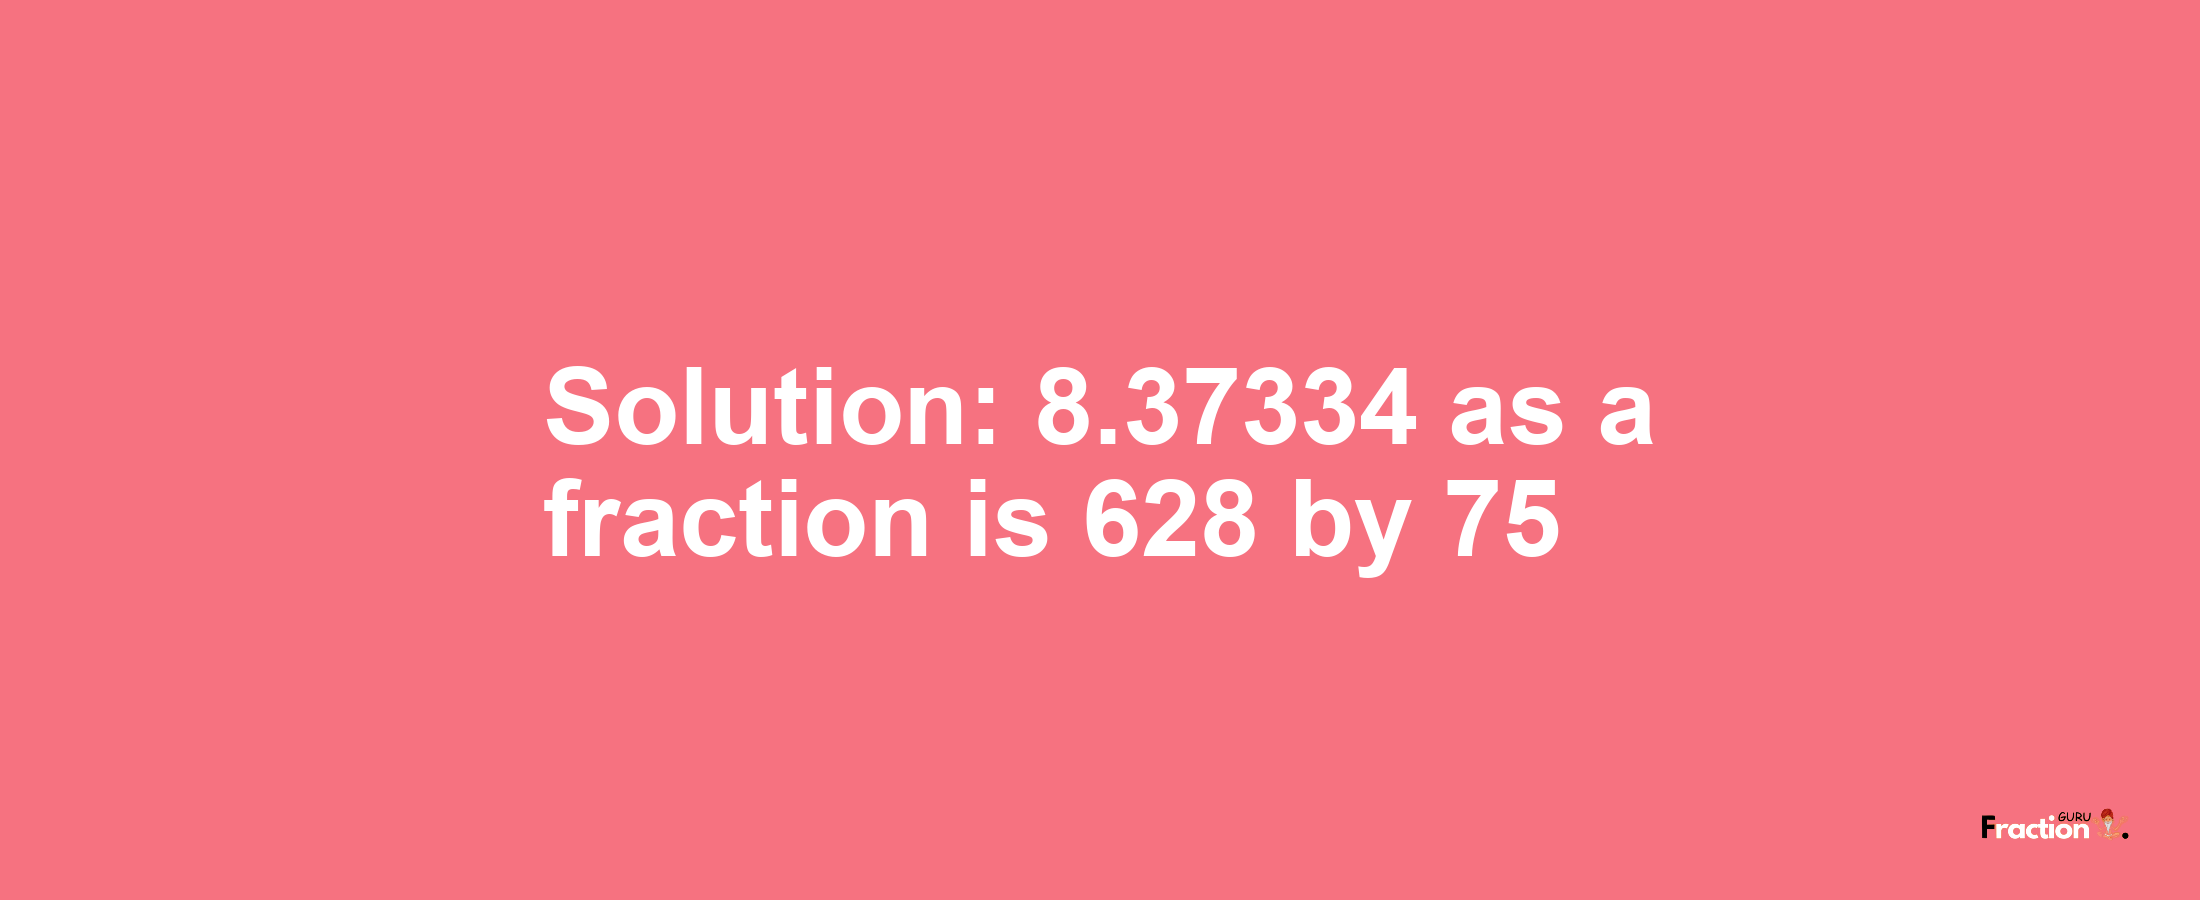 Solution:8.37334 as a fraction is 628/75